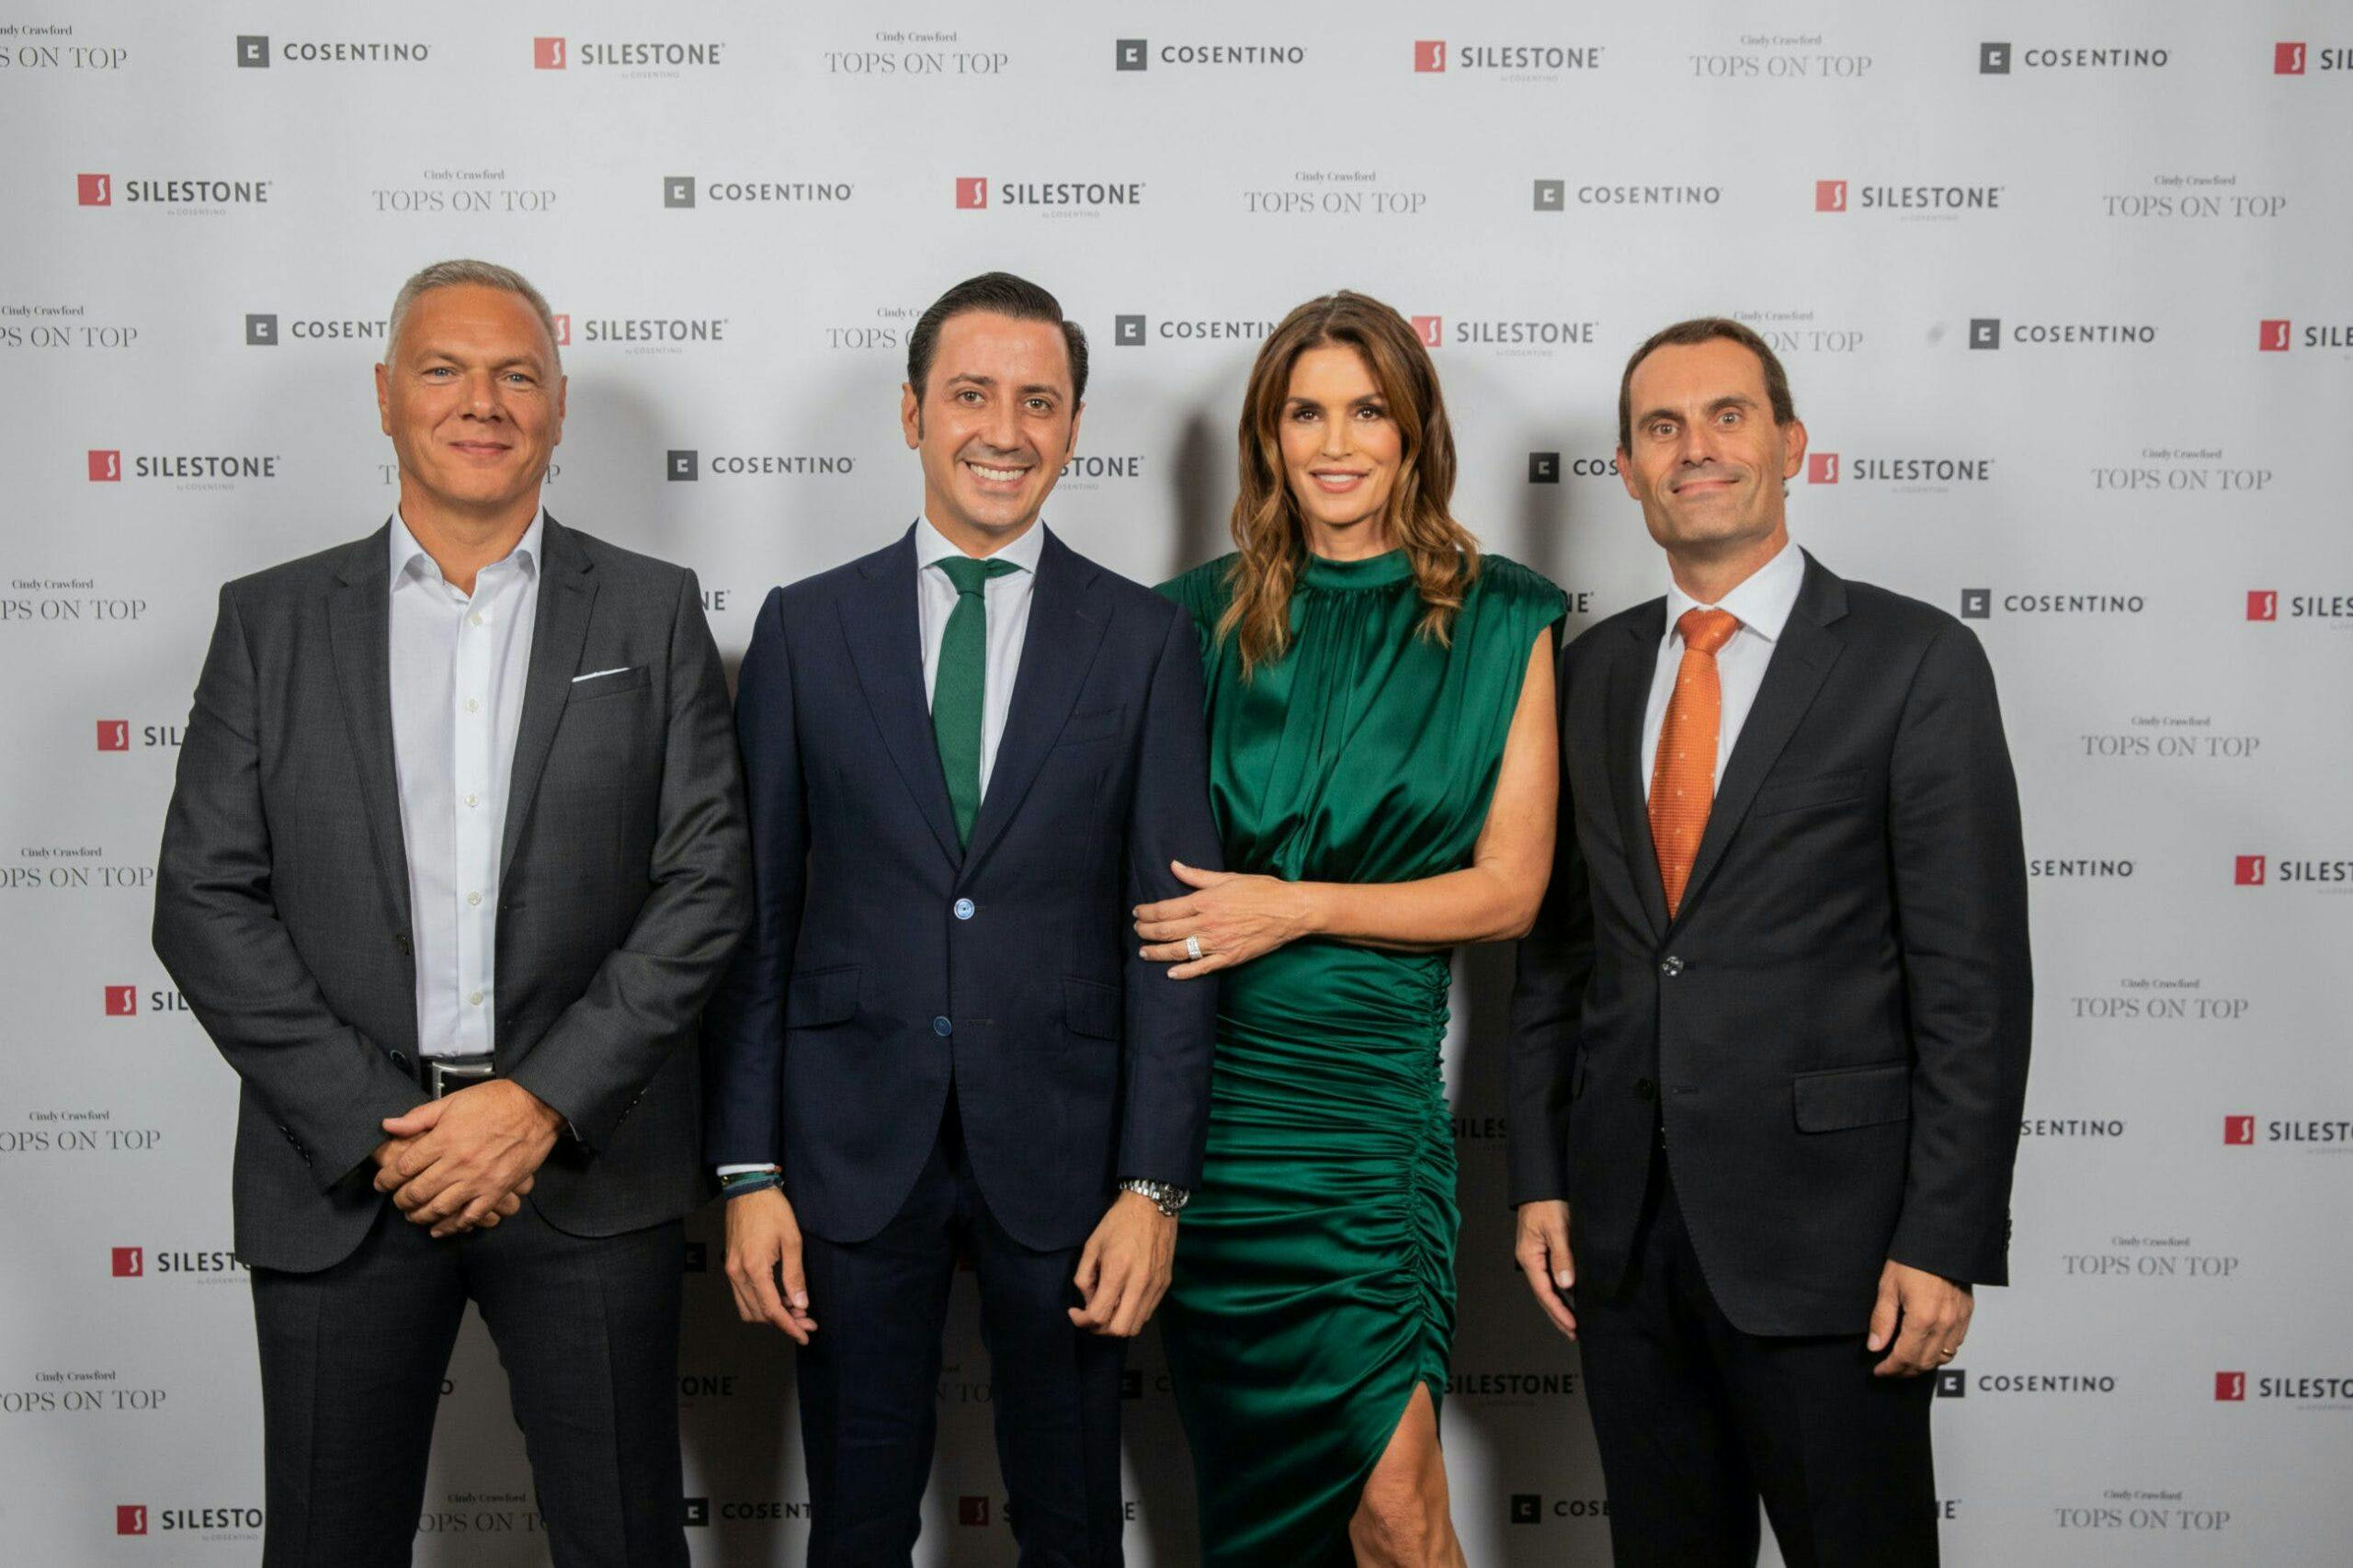 Image 33 of Paul Gidley Eduardo Cosentino Cindy Crawford Pedro Parra 3 scaled in Silestone® Presents its New "Tops on Top 2019" Campaign Featuring Cindy Crawford - Cosentino